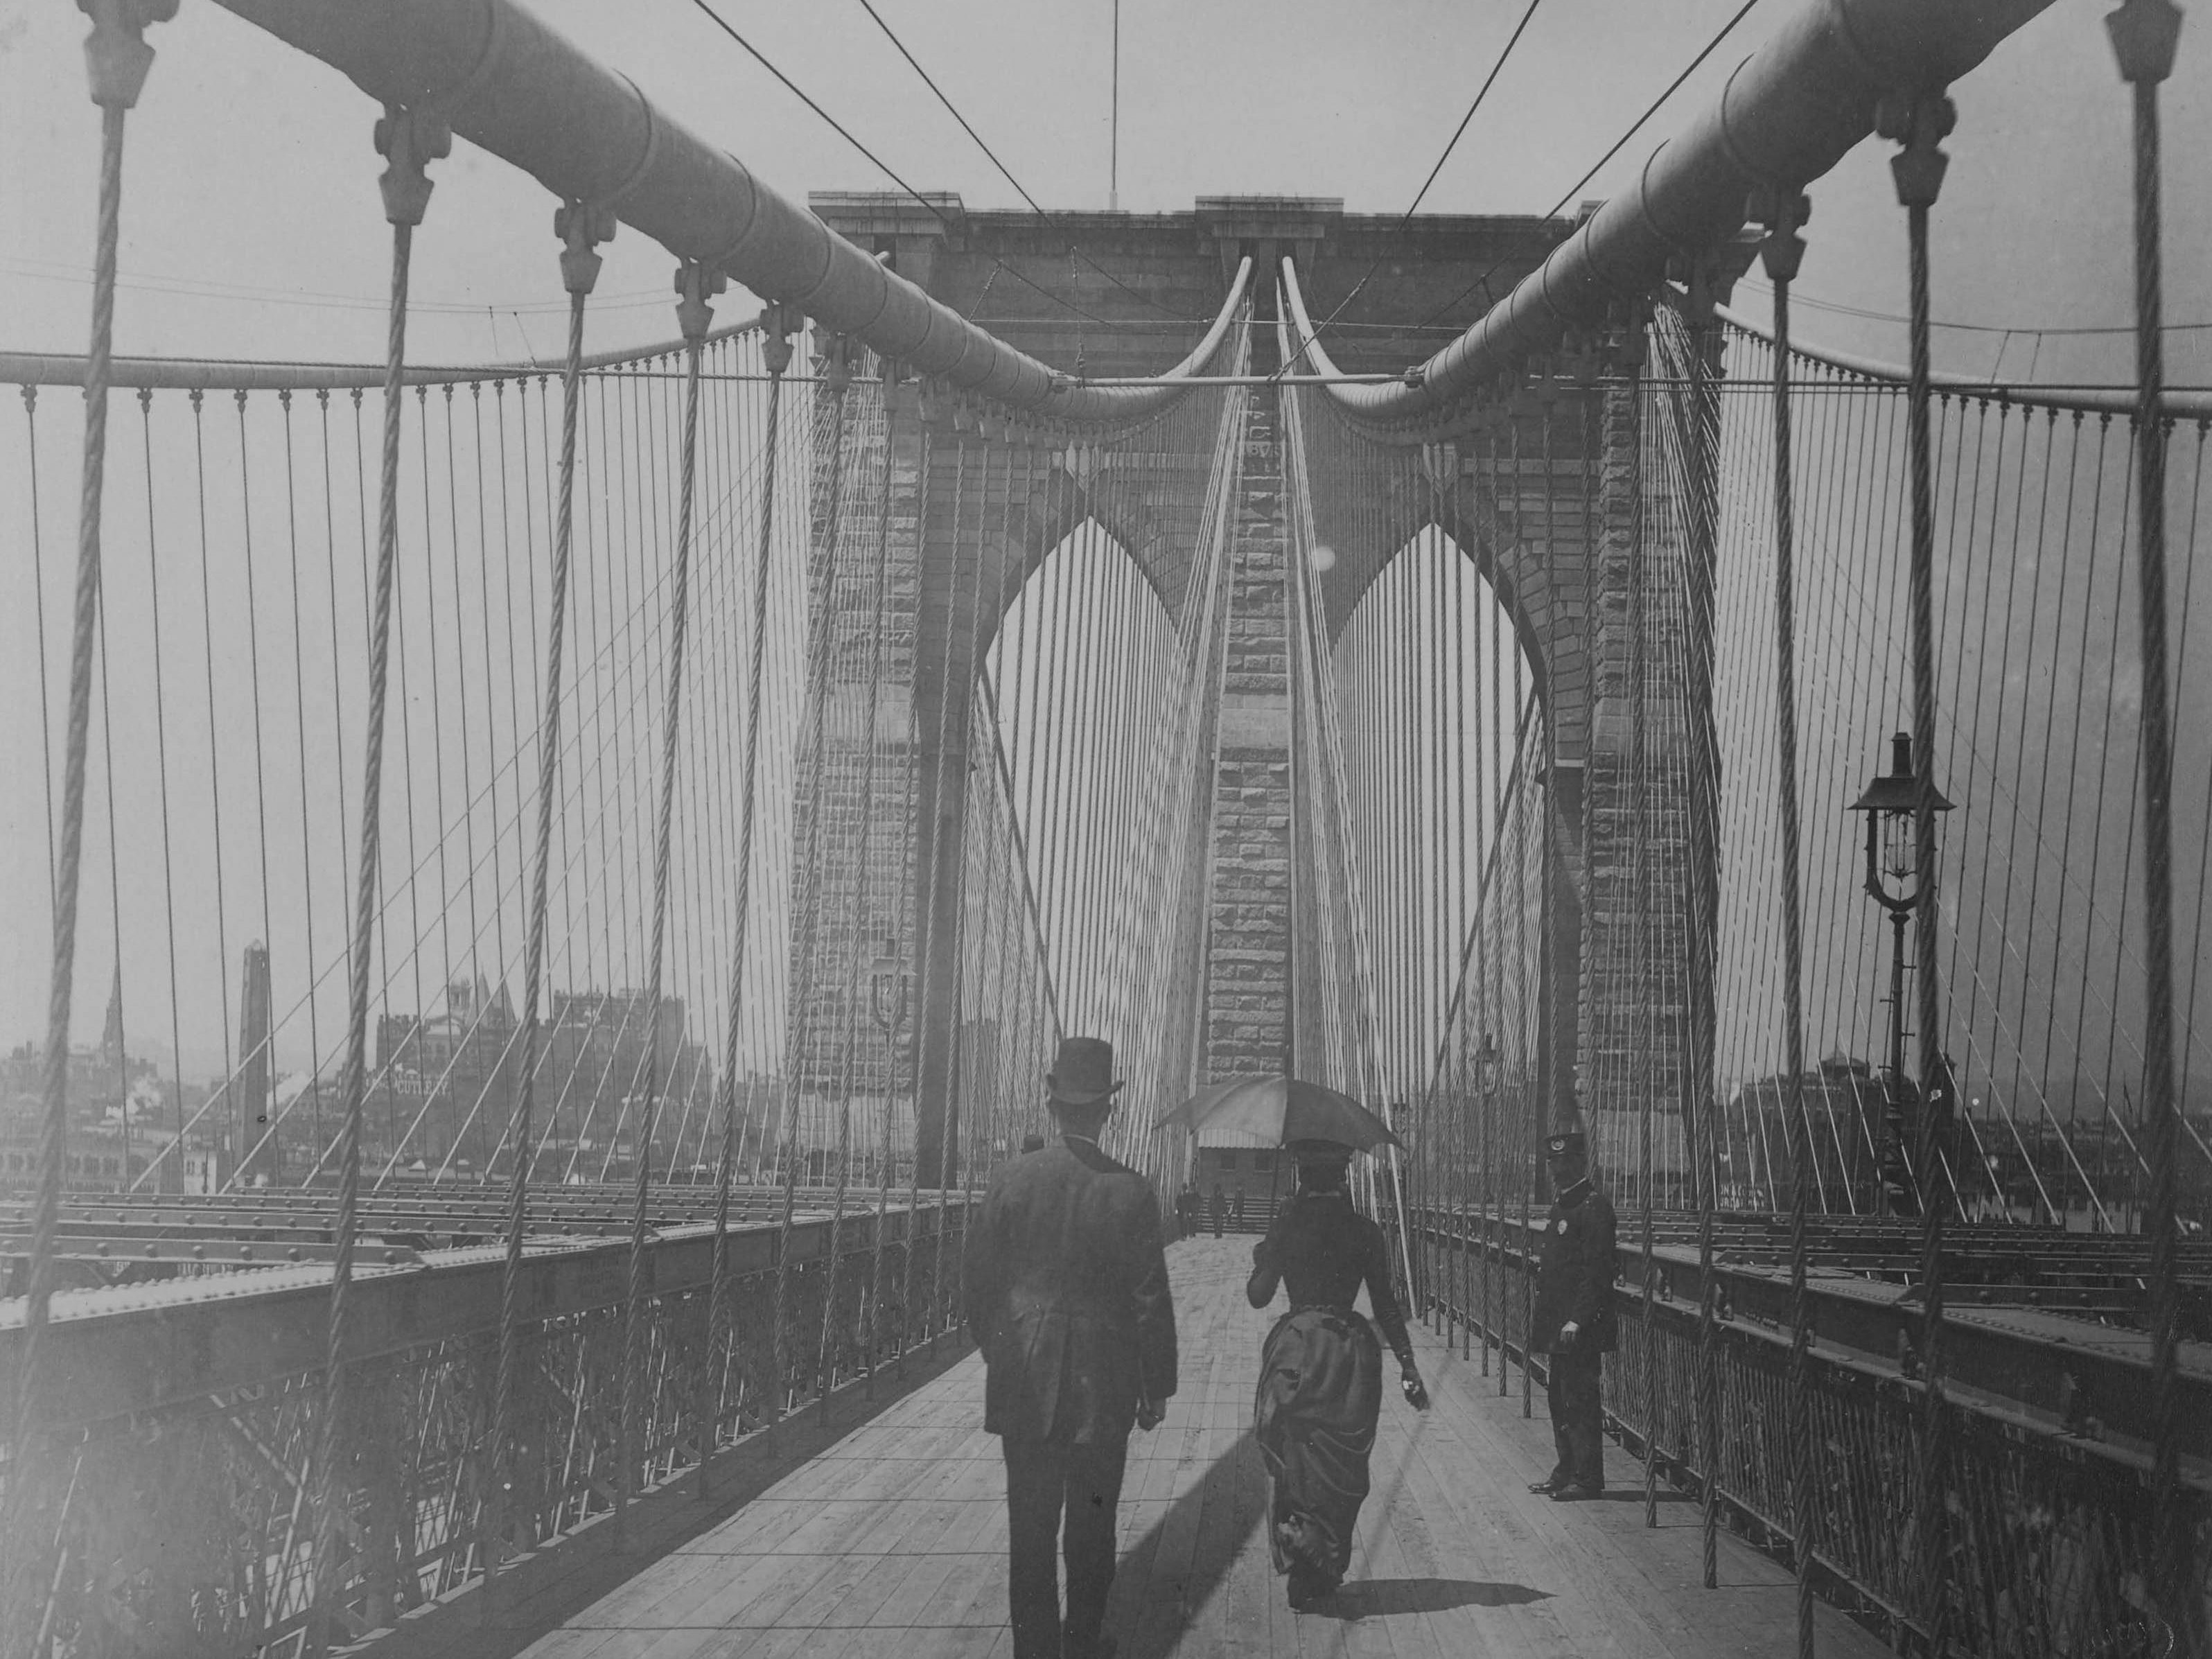 On the Brooklyn Bridge. Three people can be recognised.